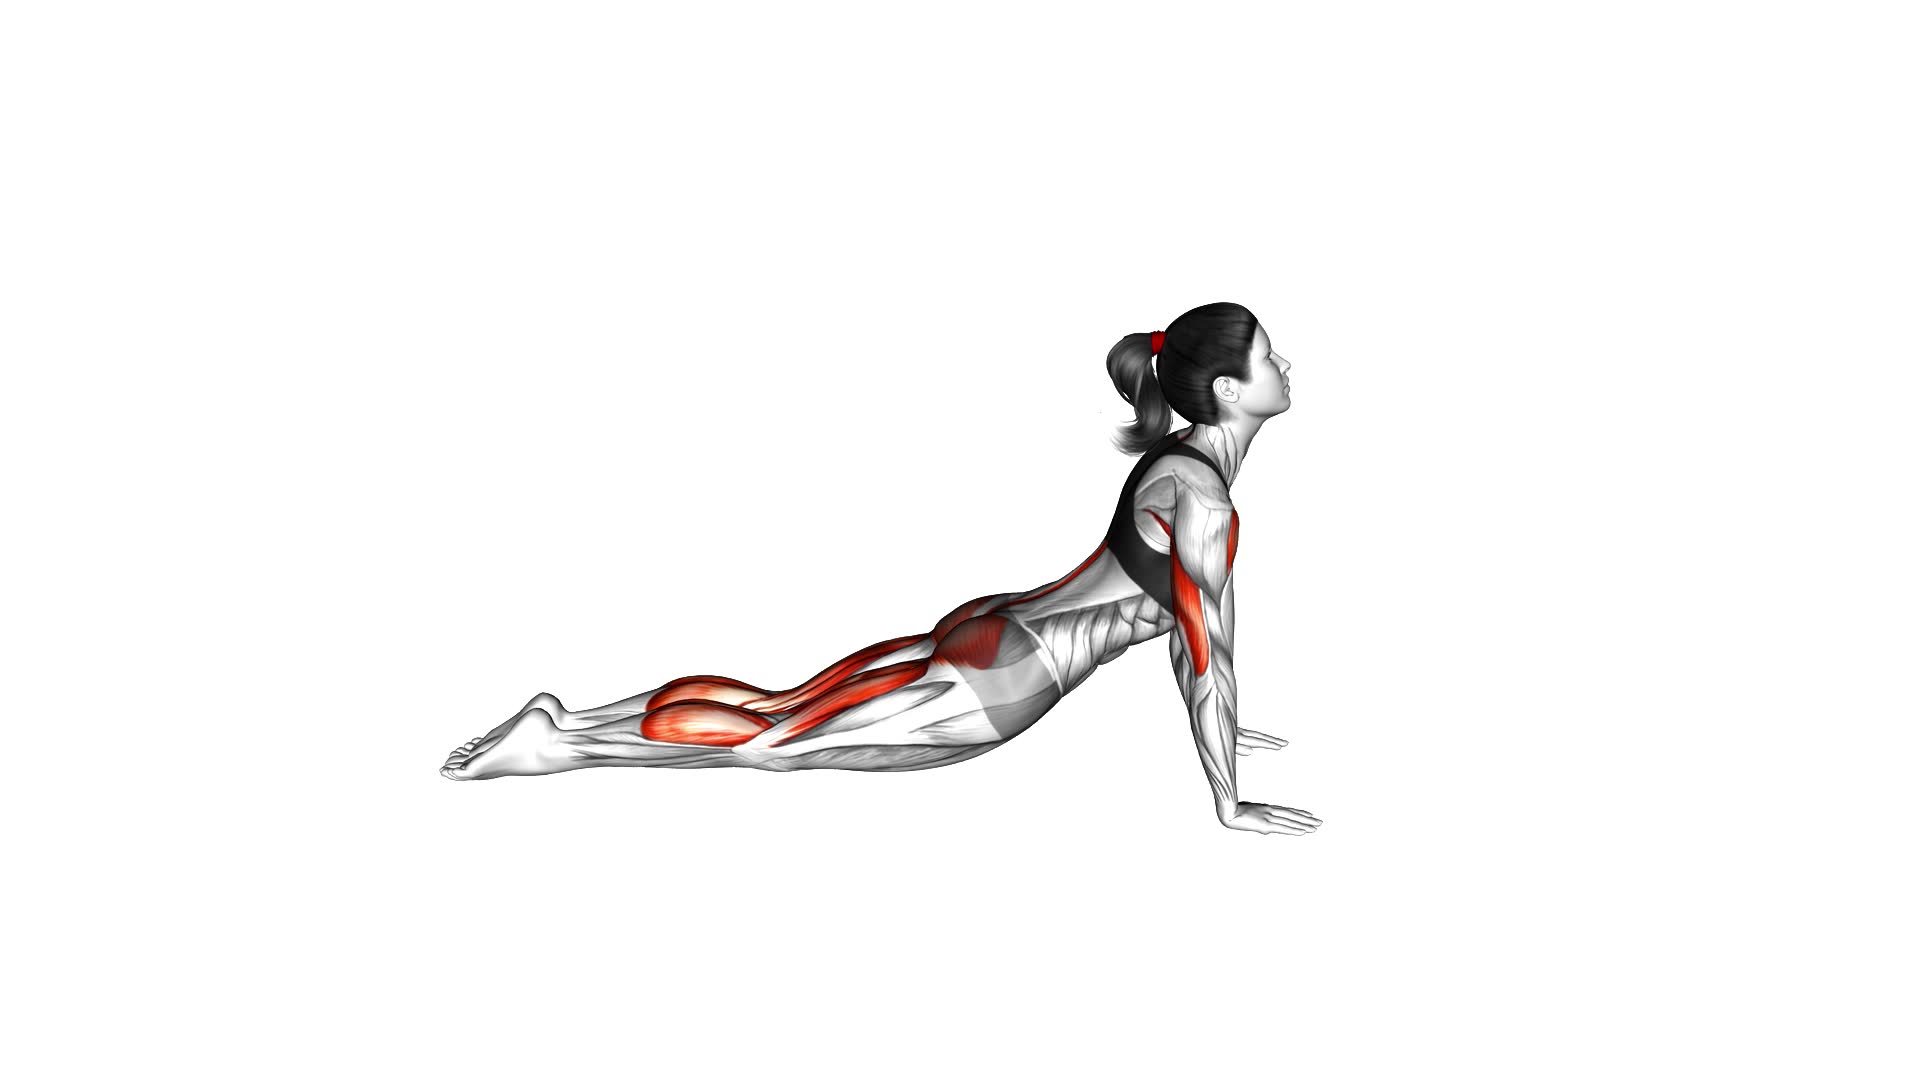 Prone Press Swan (female) - Video Exercise Guide & Tips